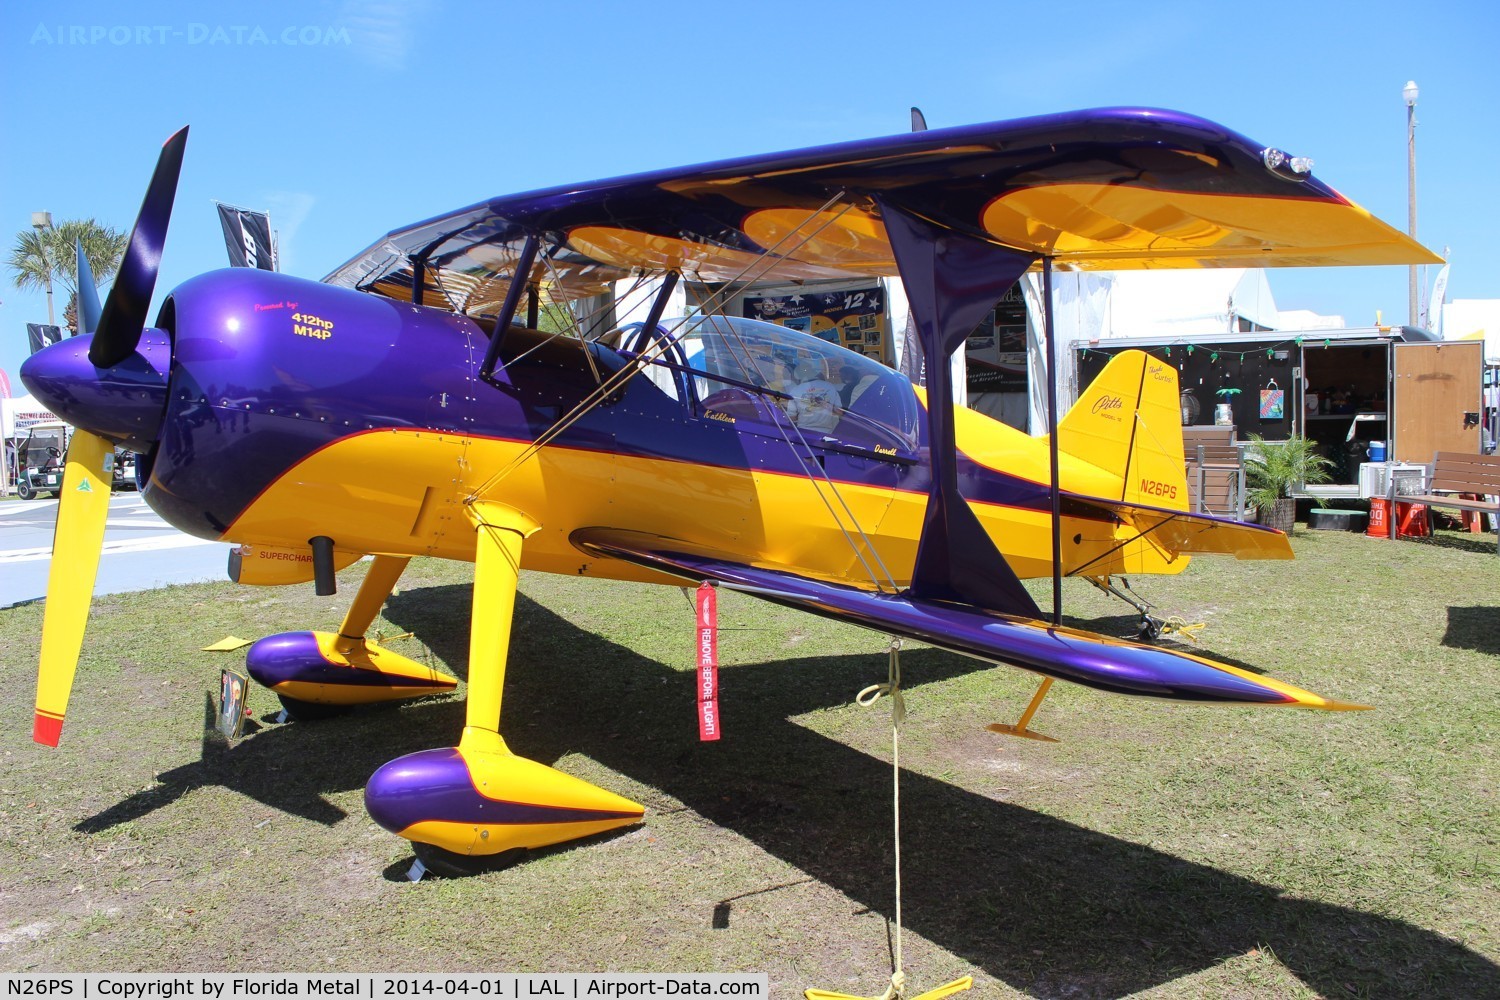 N26PS, Pitts Model 12 C/N 298, Pitts 12